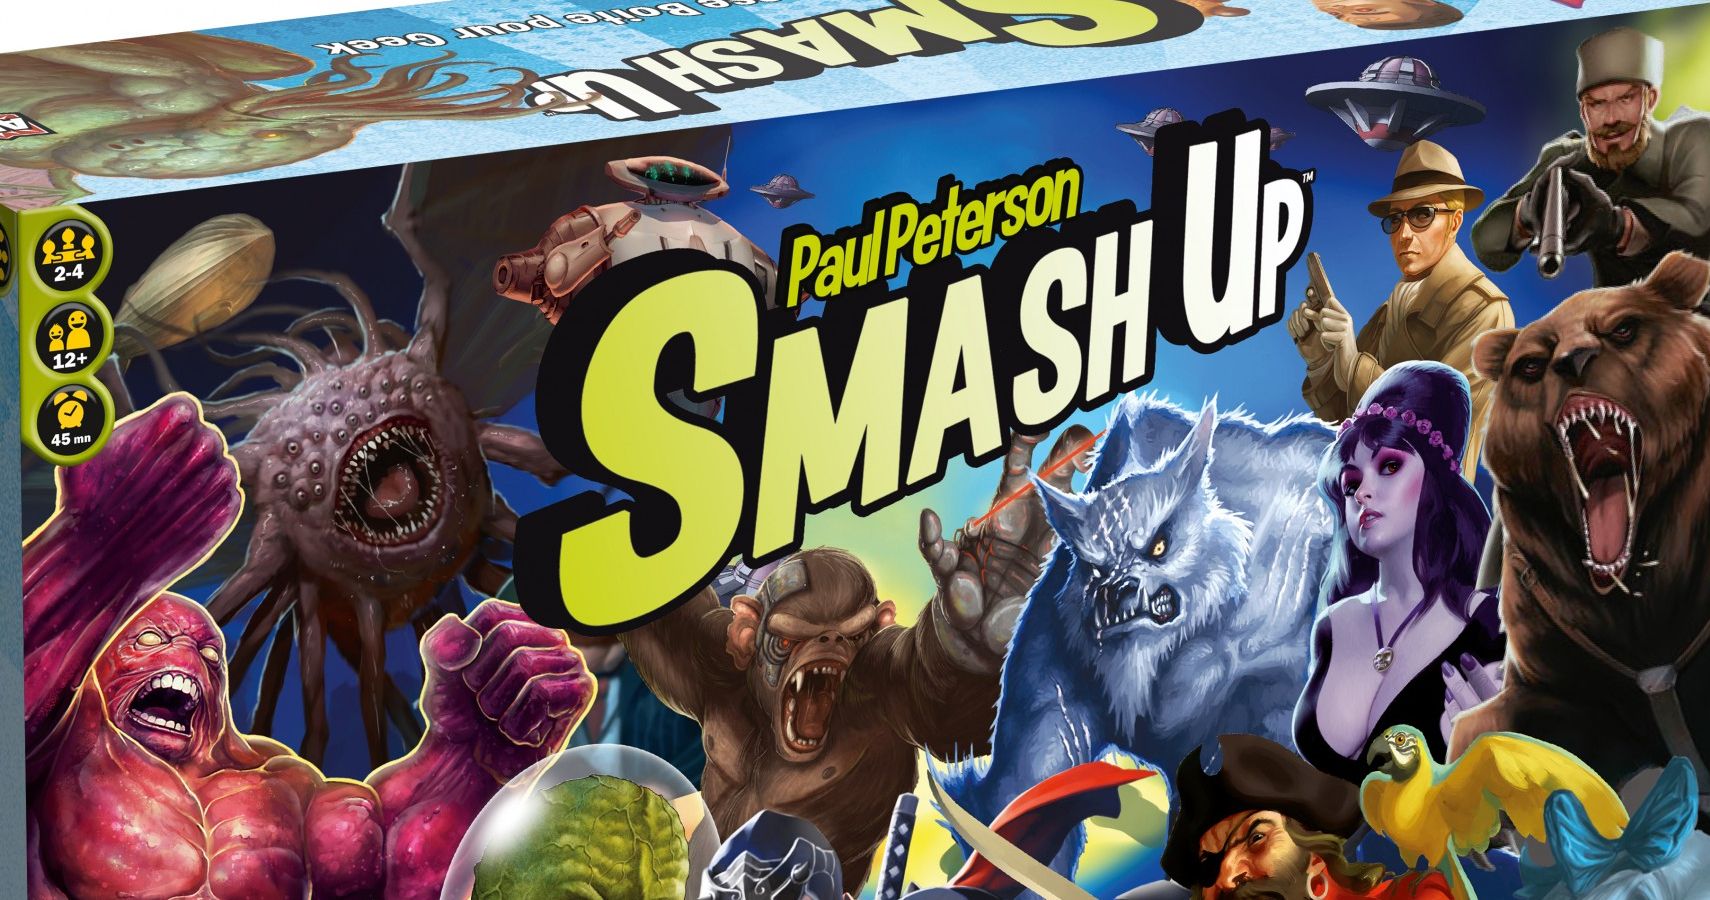 5 Best Board Games For A Night In With Family